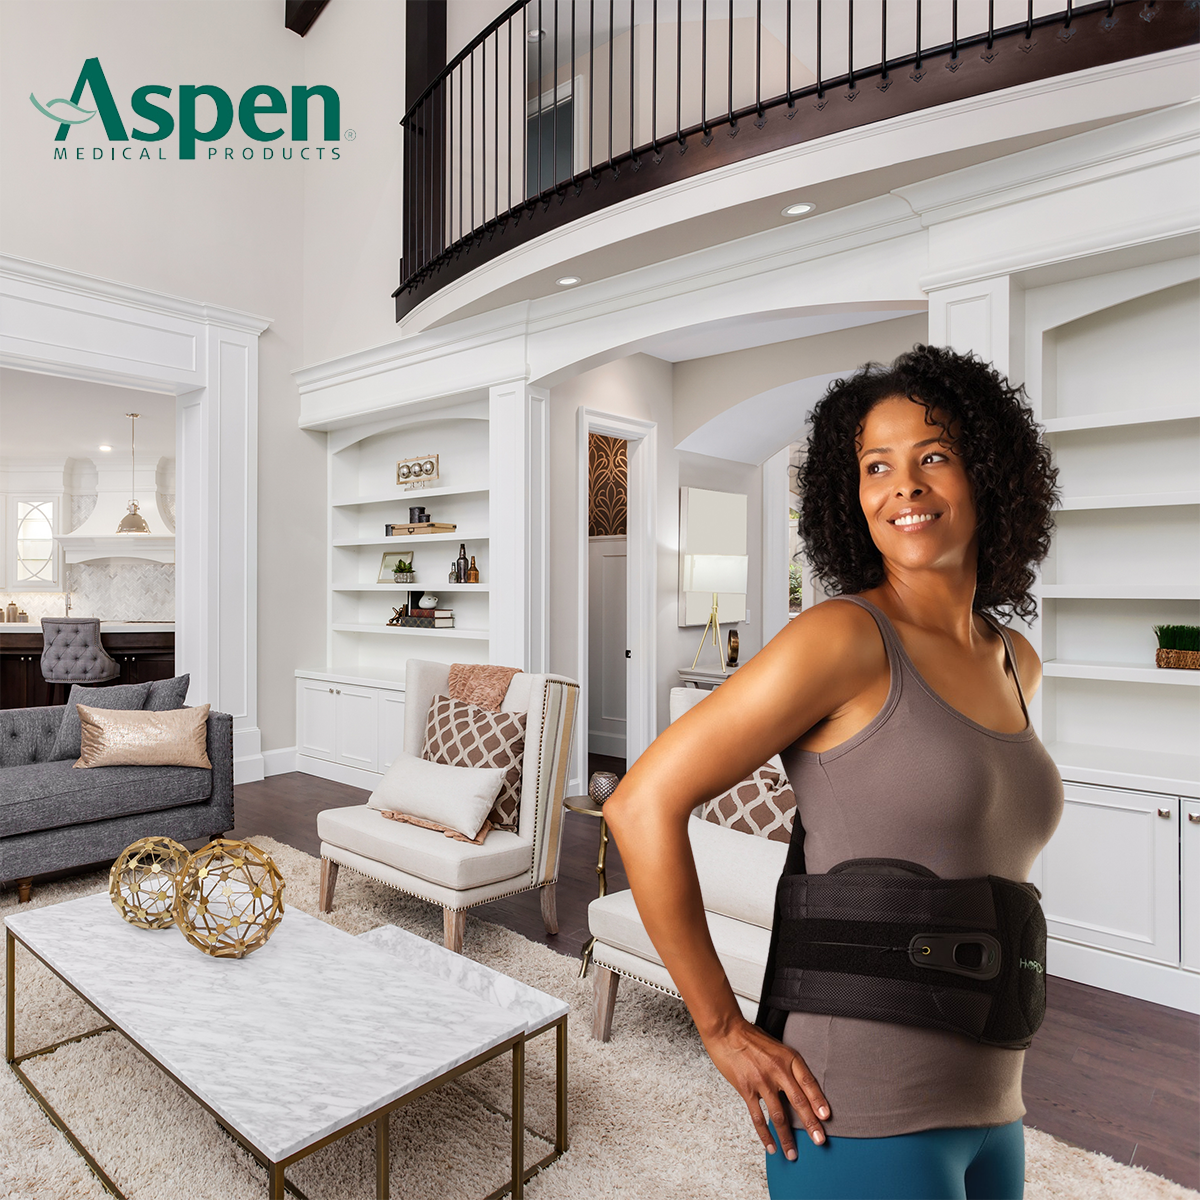 The Role of the Aspen Horizon 627 Lumbar Brace in Post-Surgical Recovery